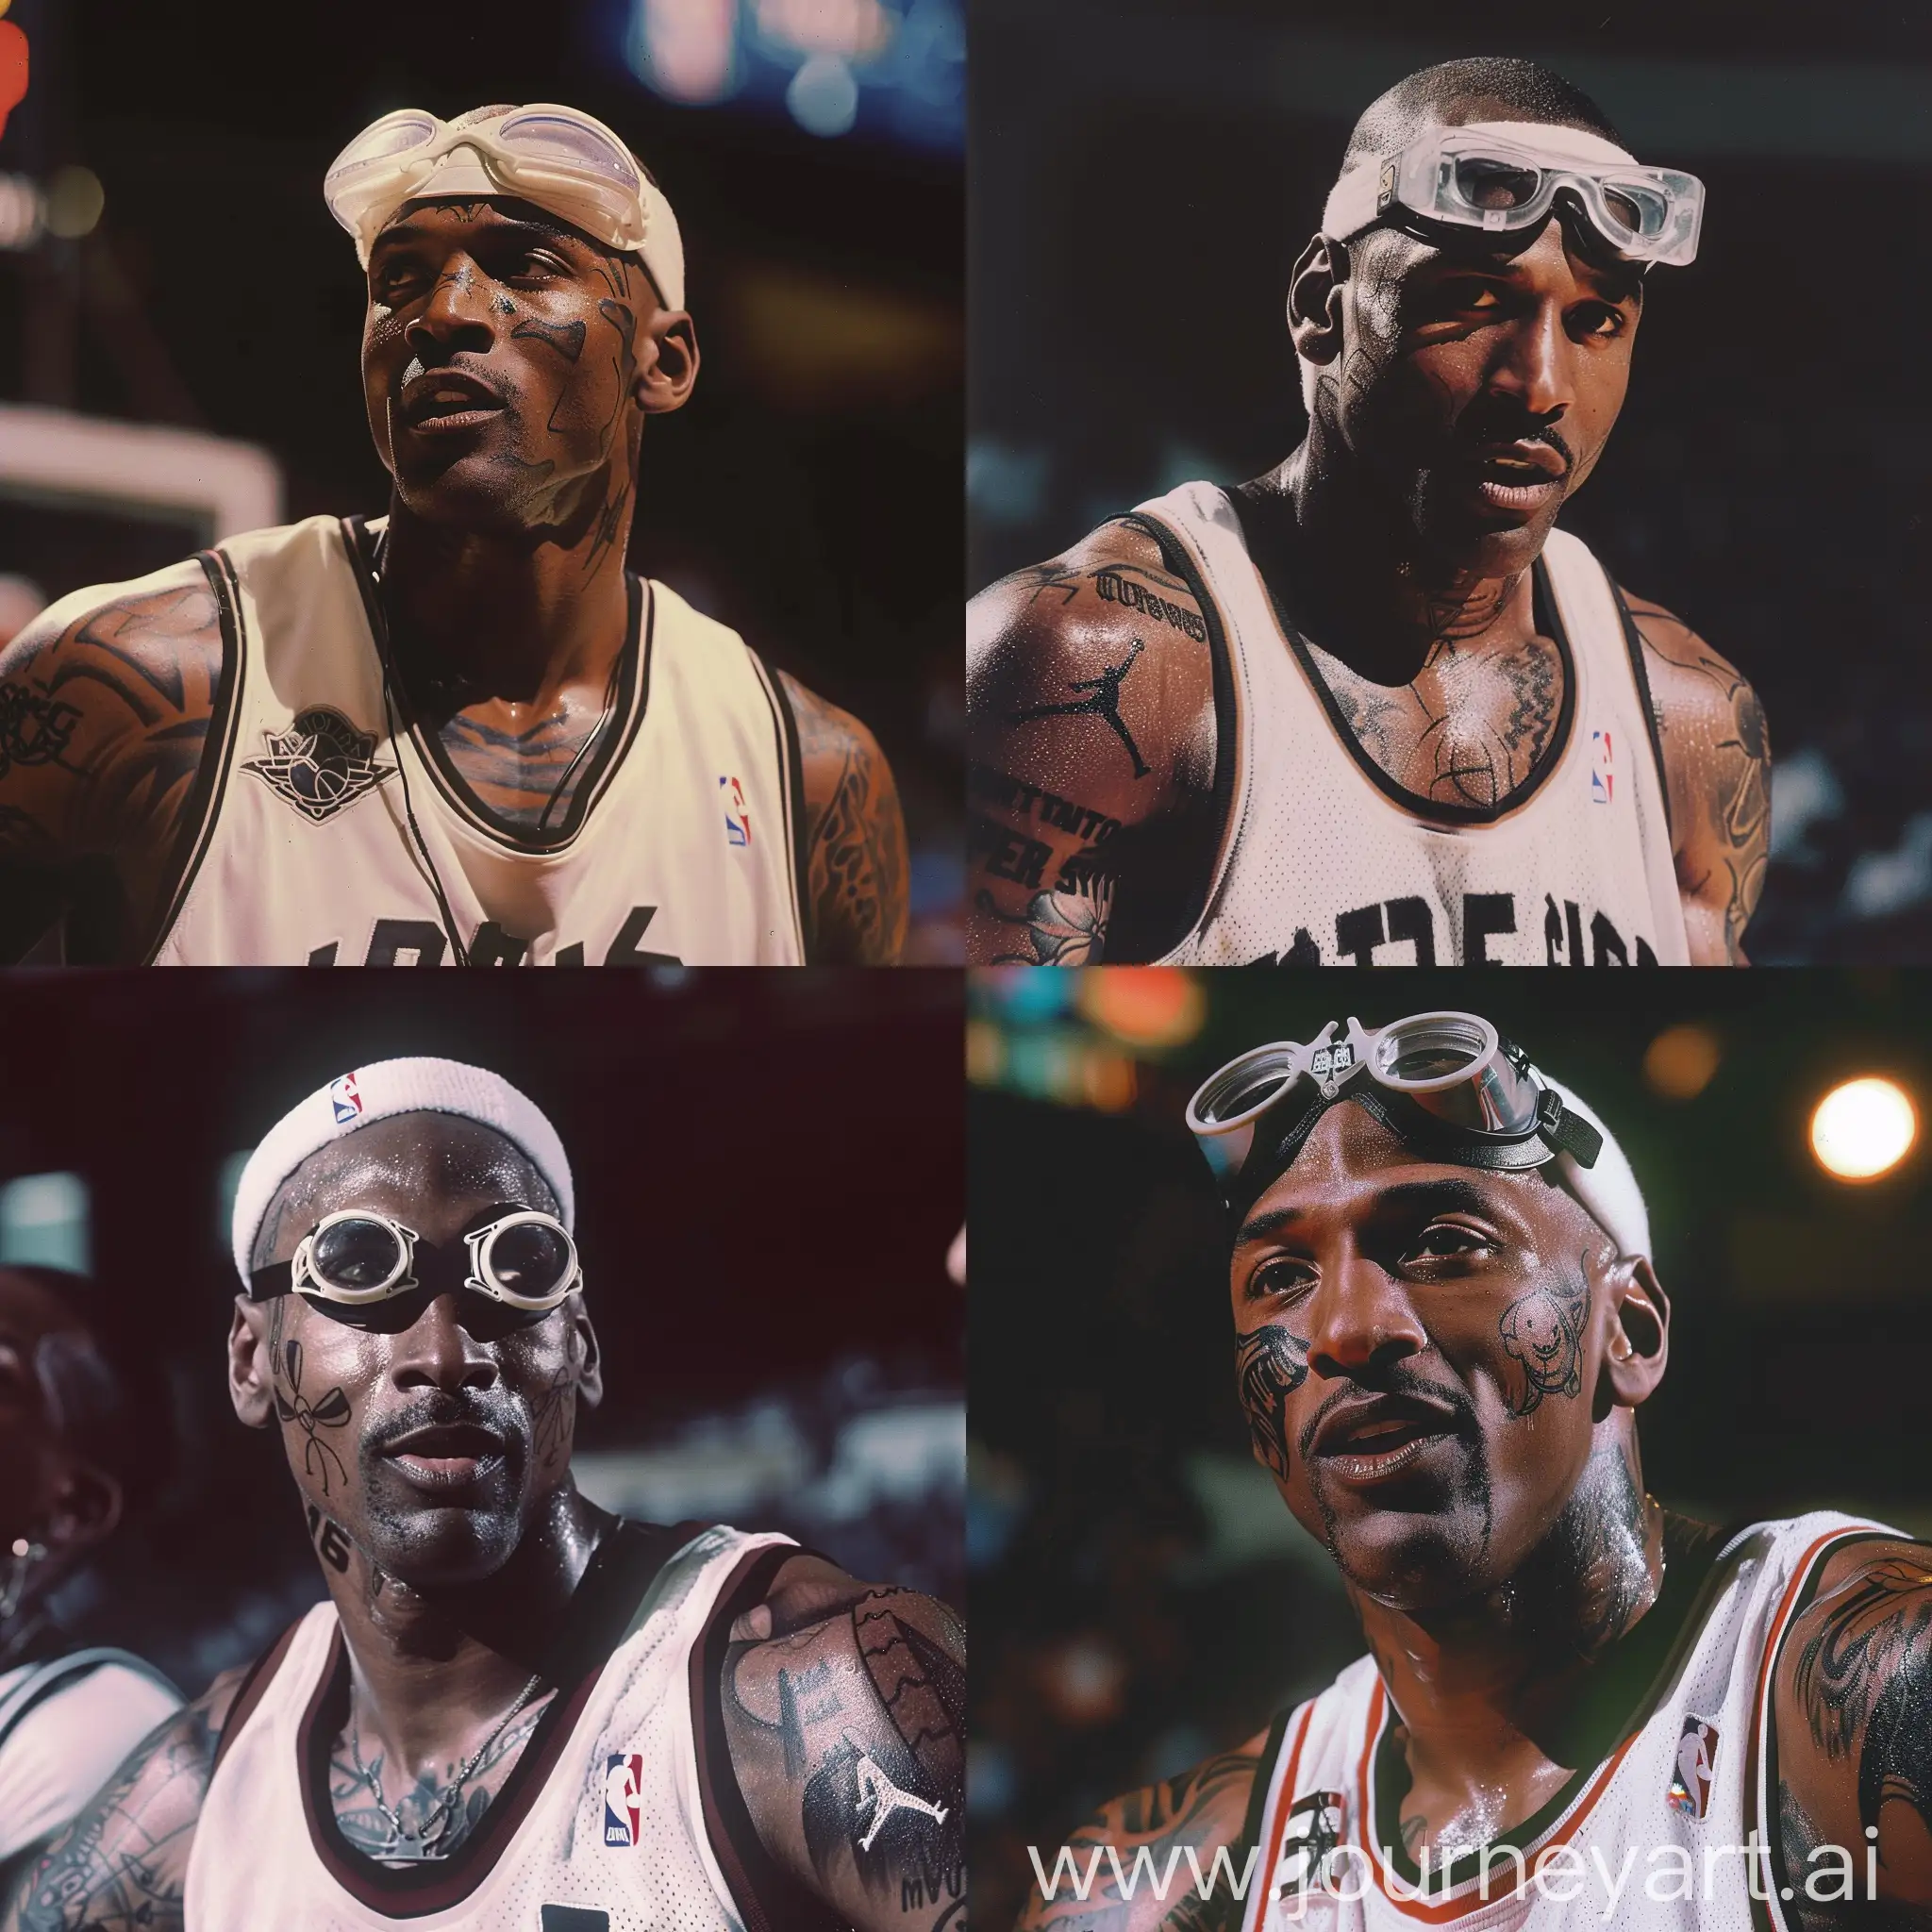 A 1990s Photograph of Michael Jordan,With Full body tattoos,Talking in a postgame interview,Wearing nba goggles and a White Headband,with a San Antonio Spurs Jersey on.